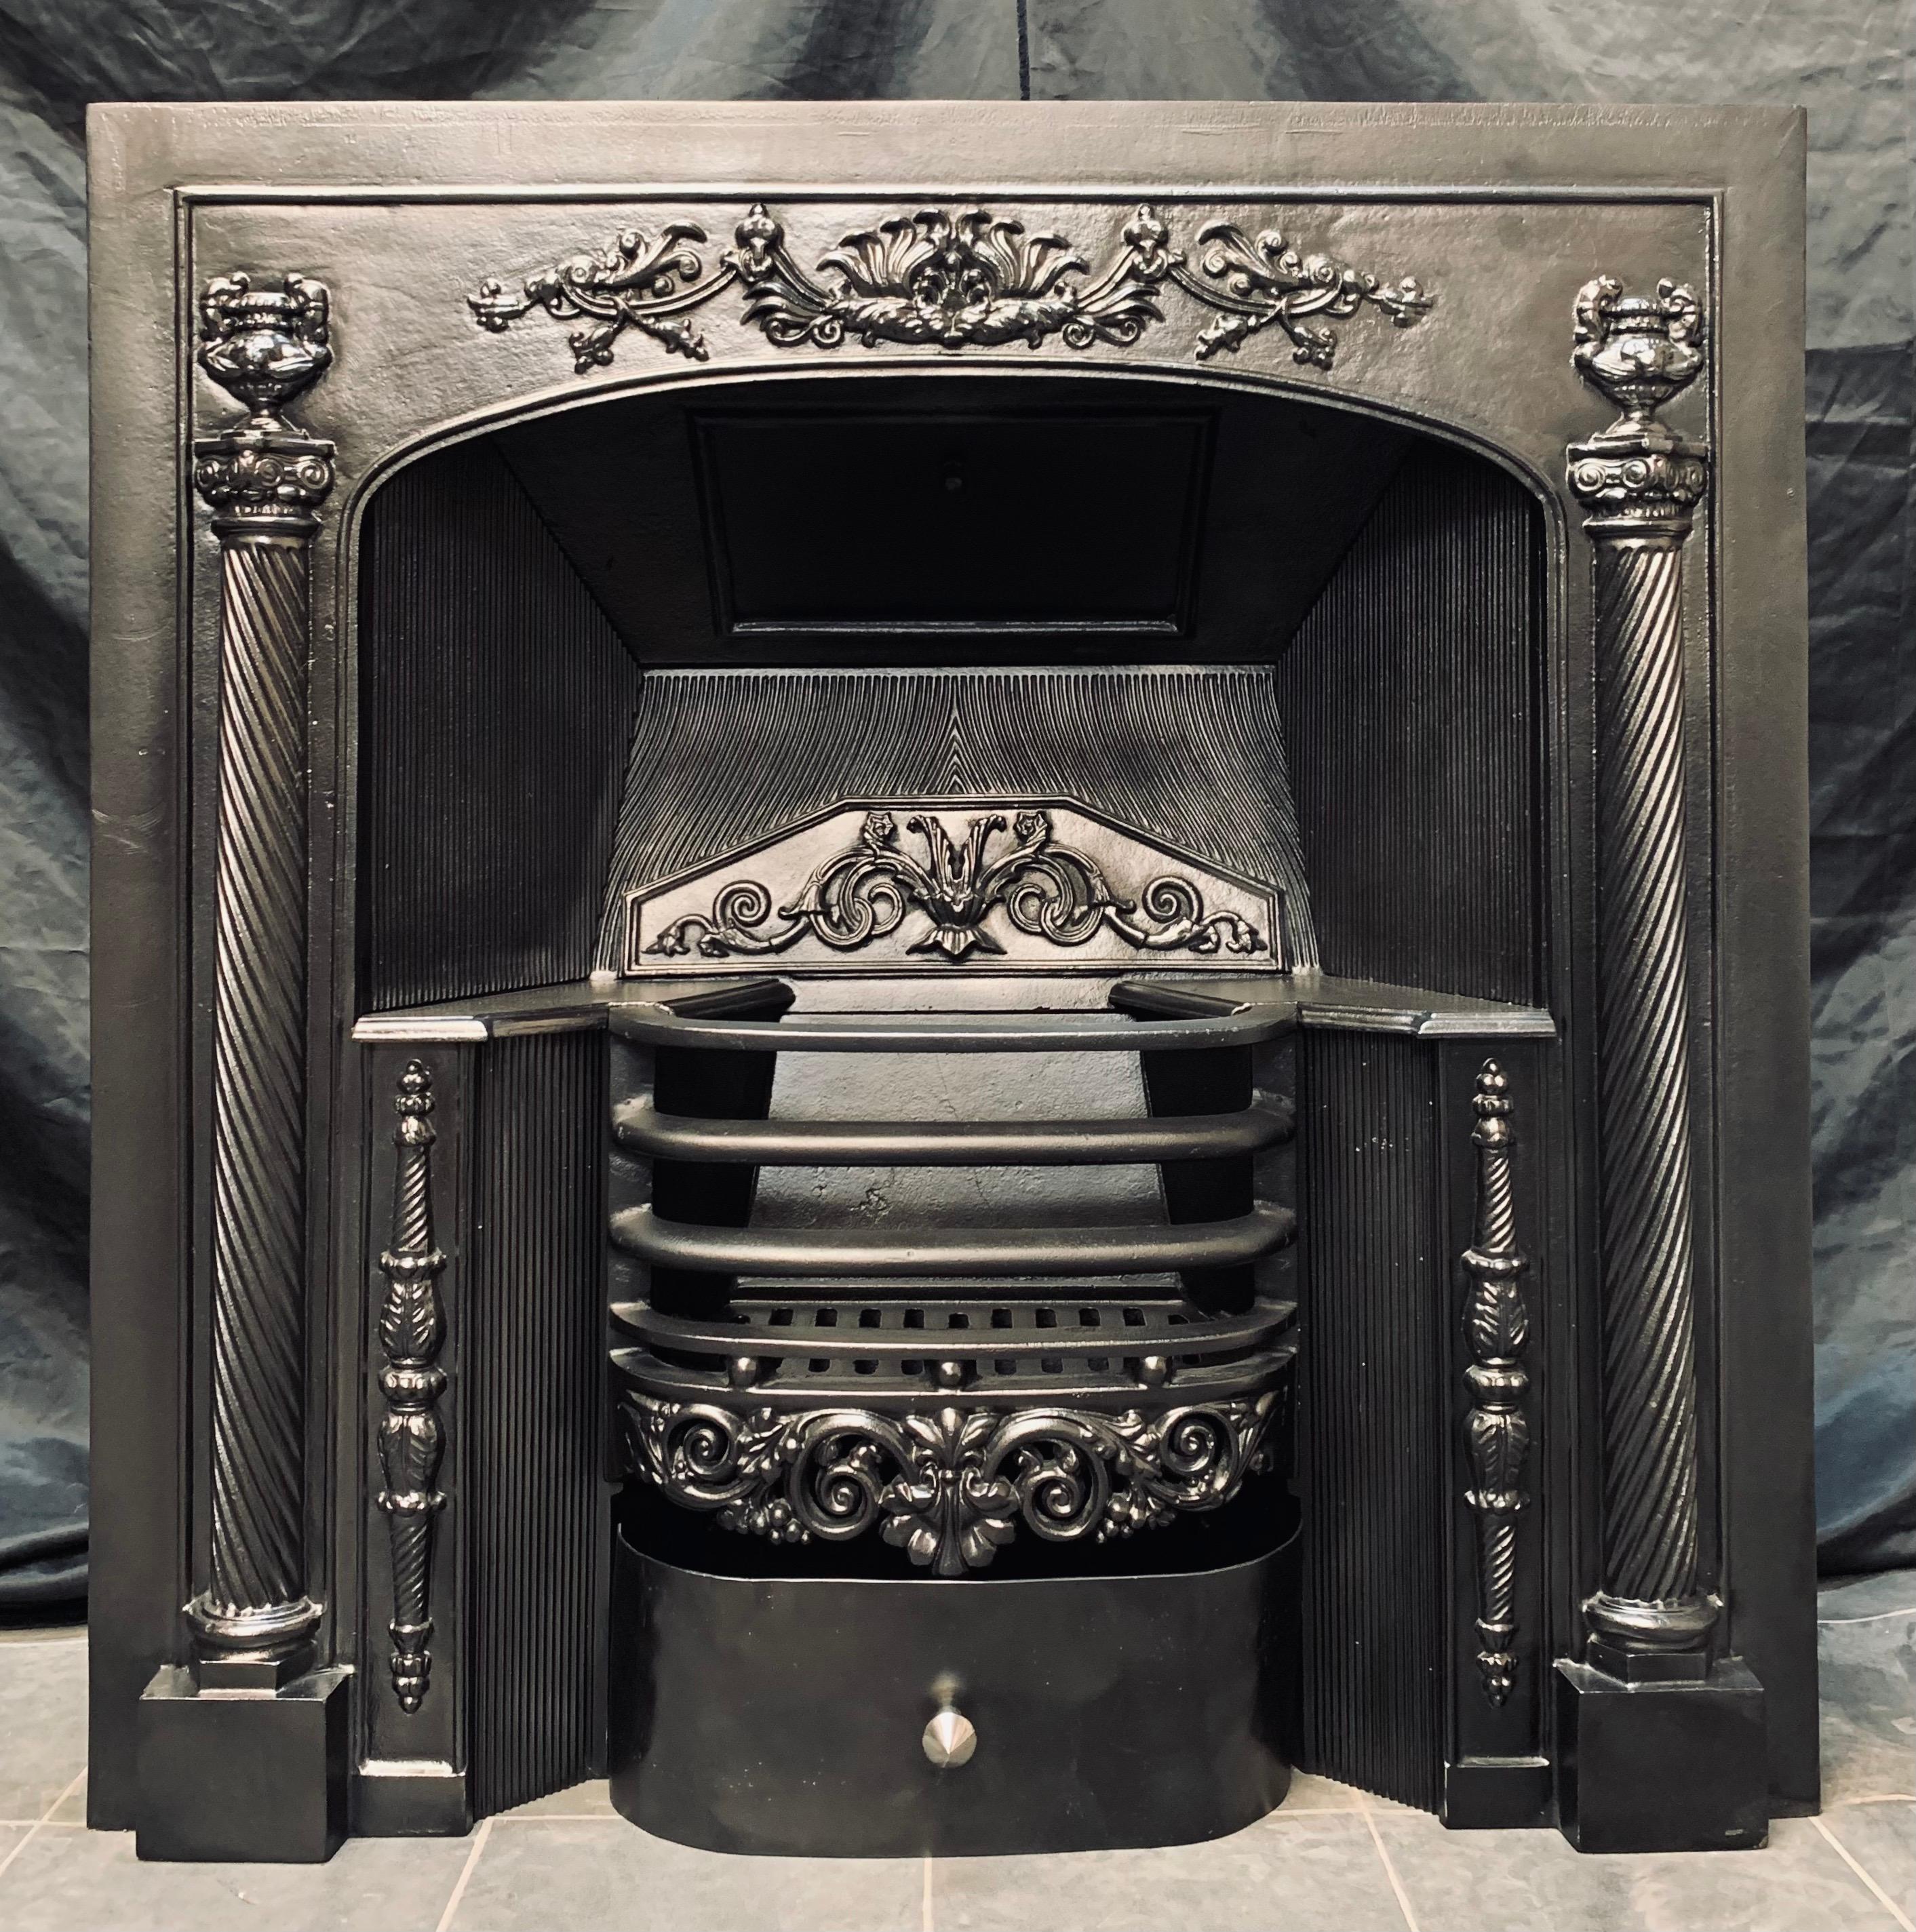 A smart and well balanced 19th century Georgian style hob grate fireplace insert. A large framed outer plate with a central raised embellishment flanked by two tall barley twist spindles capped by urns, and highlighted foot blocks. A central three